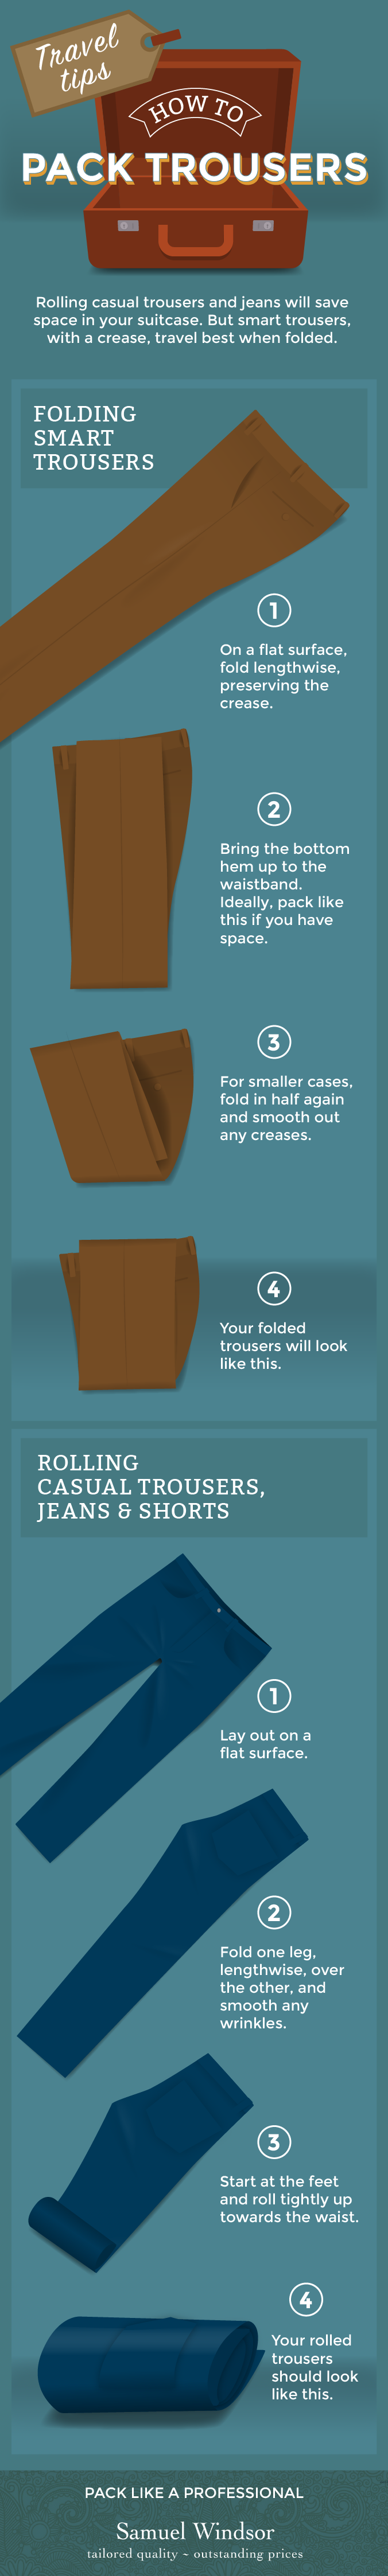 Packing pants infographic